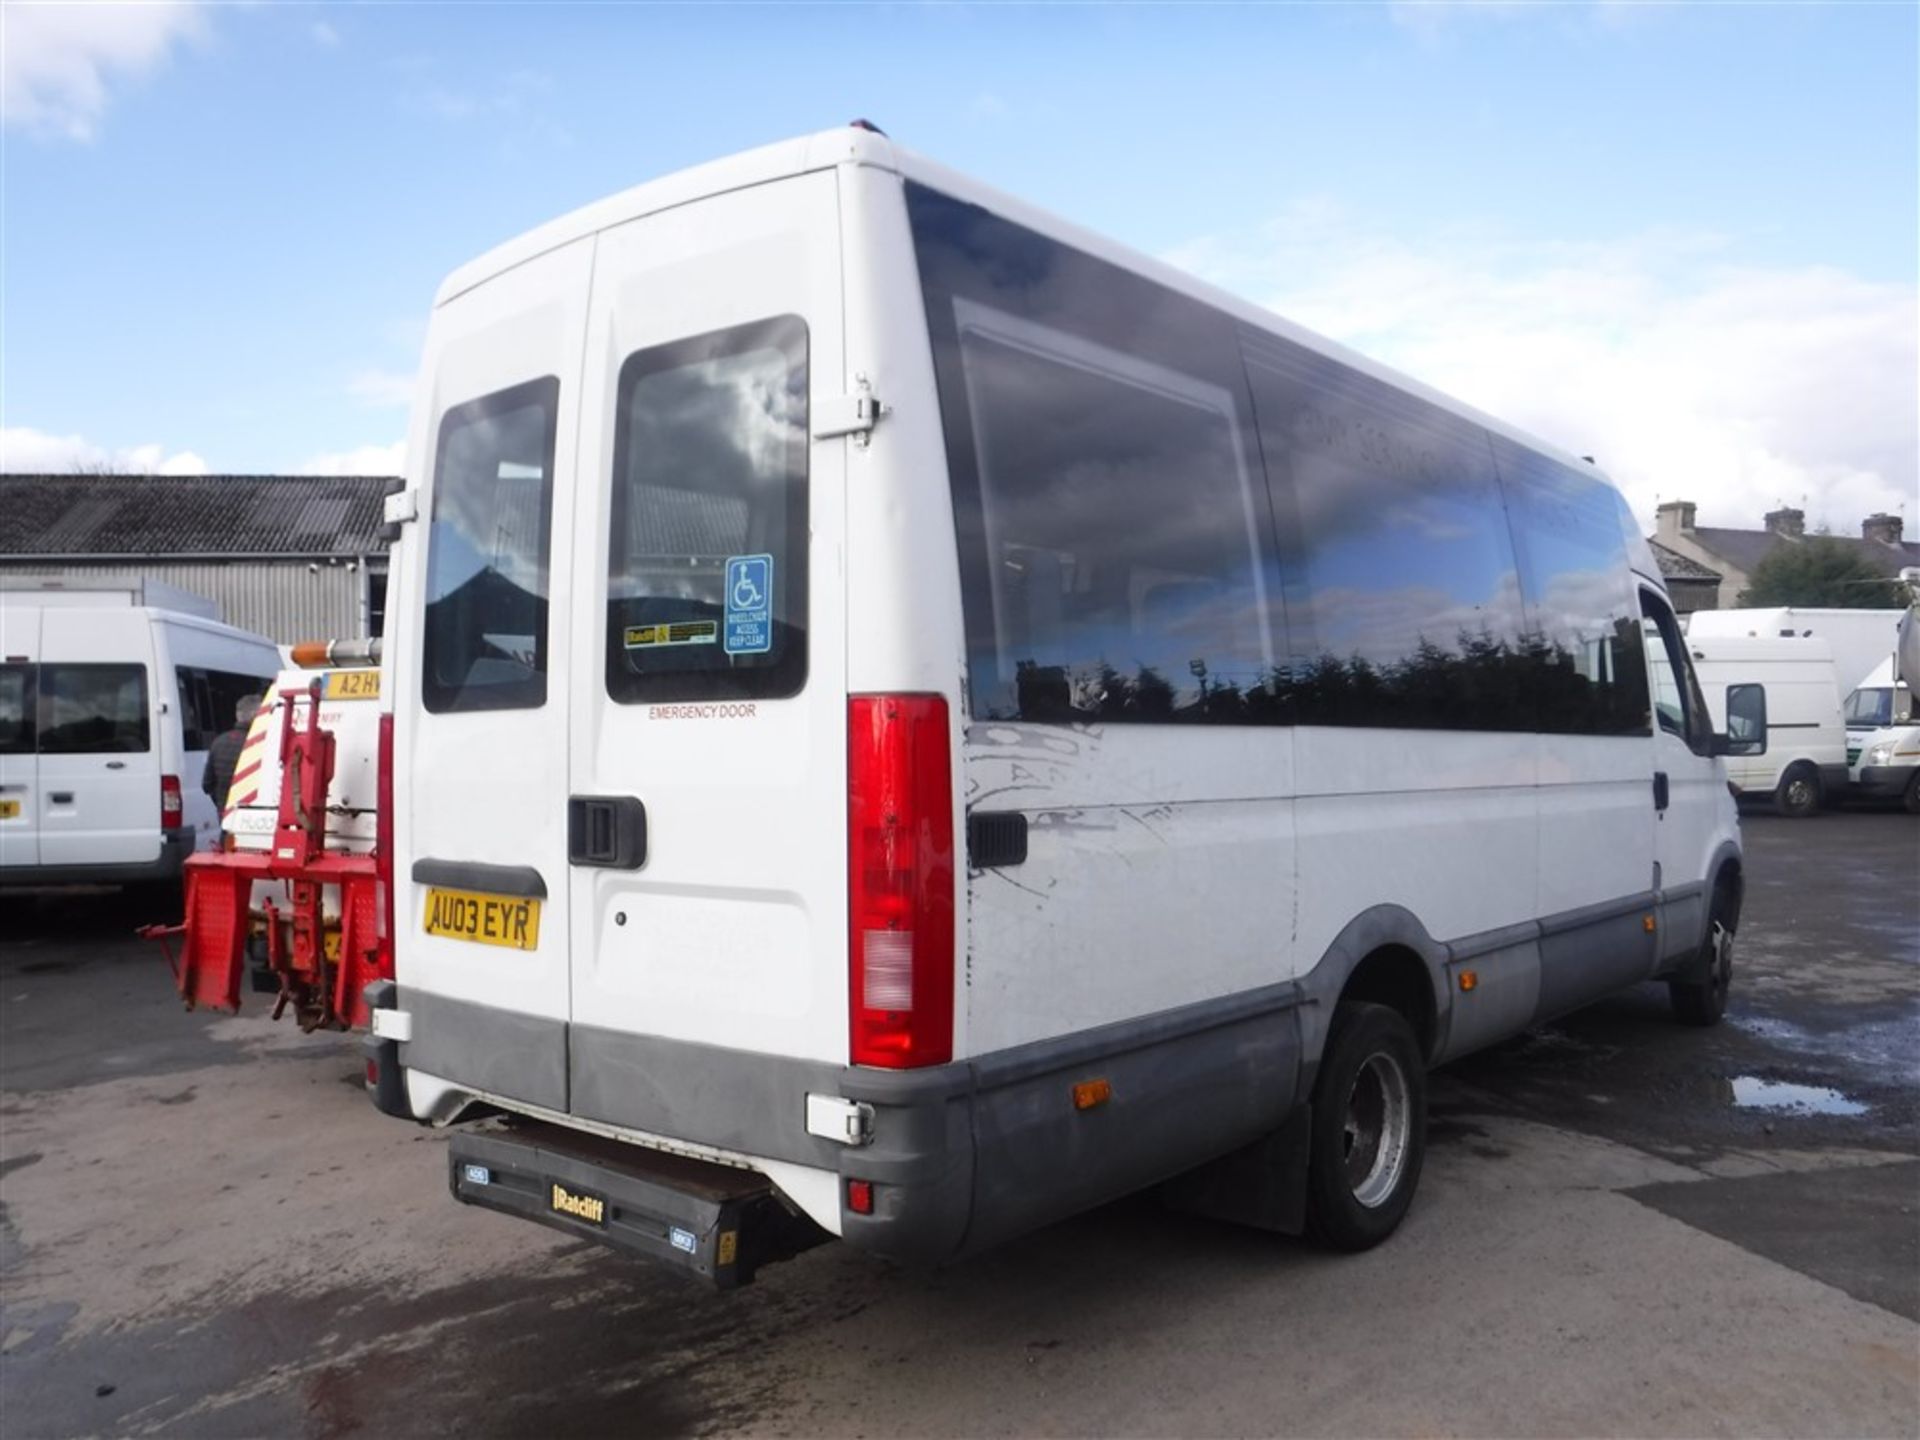 03 reg IVECO DAILY 40C13 IRIS BUS, 1ST REG 03/03, TEST 03/19, 105672KM WARRANTED, V5 HERE, 1 OWNER - Image 4 of 6